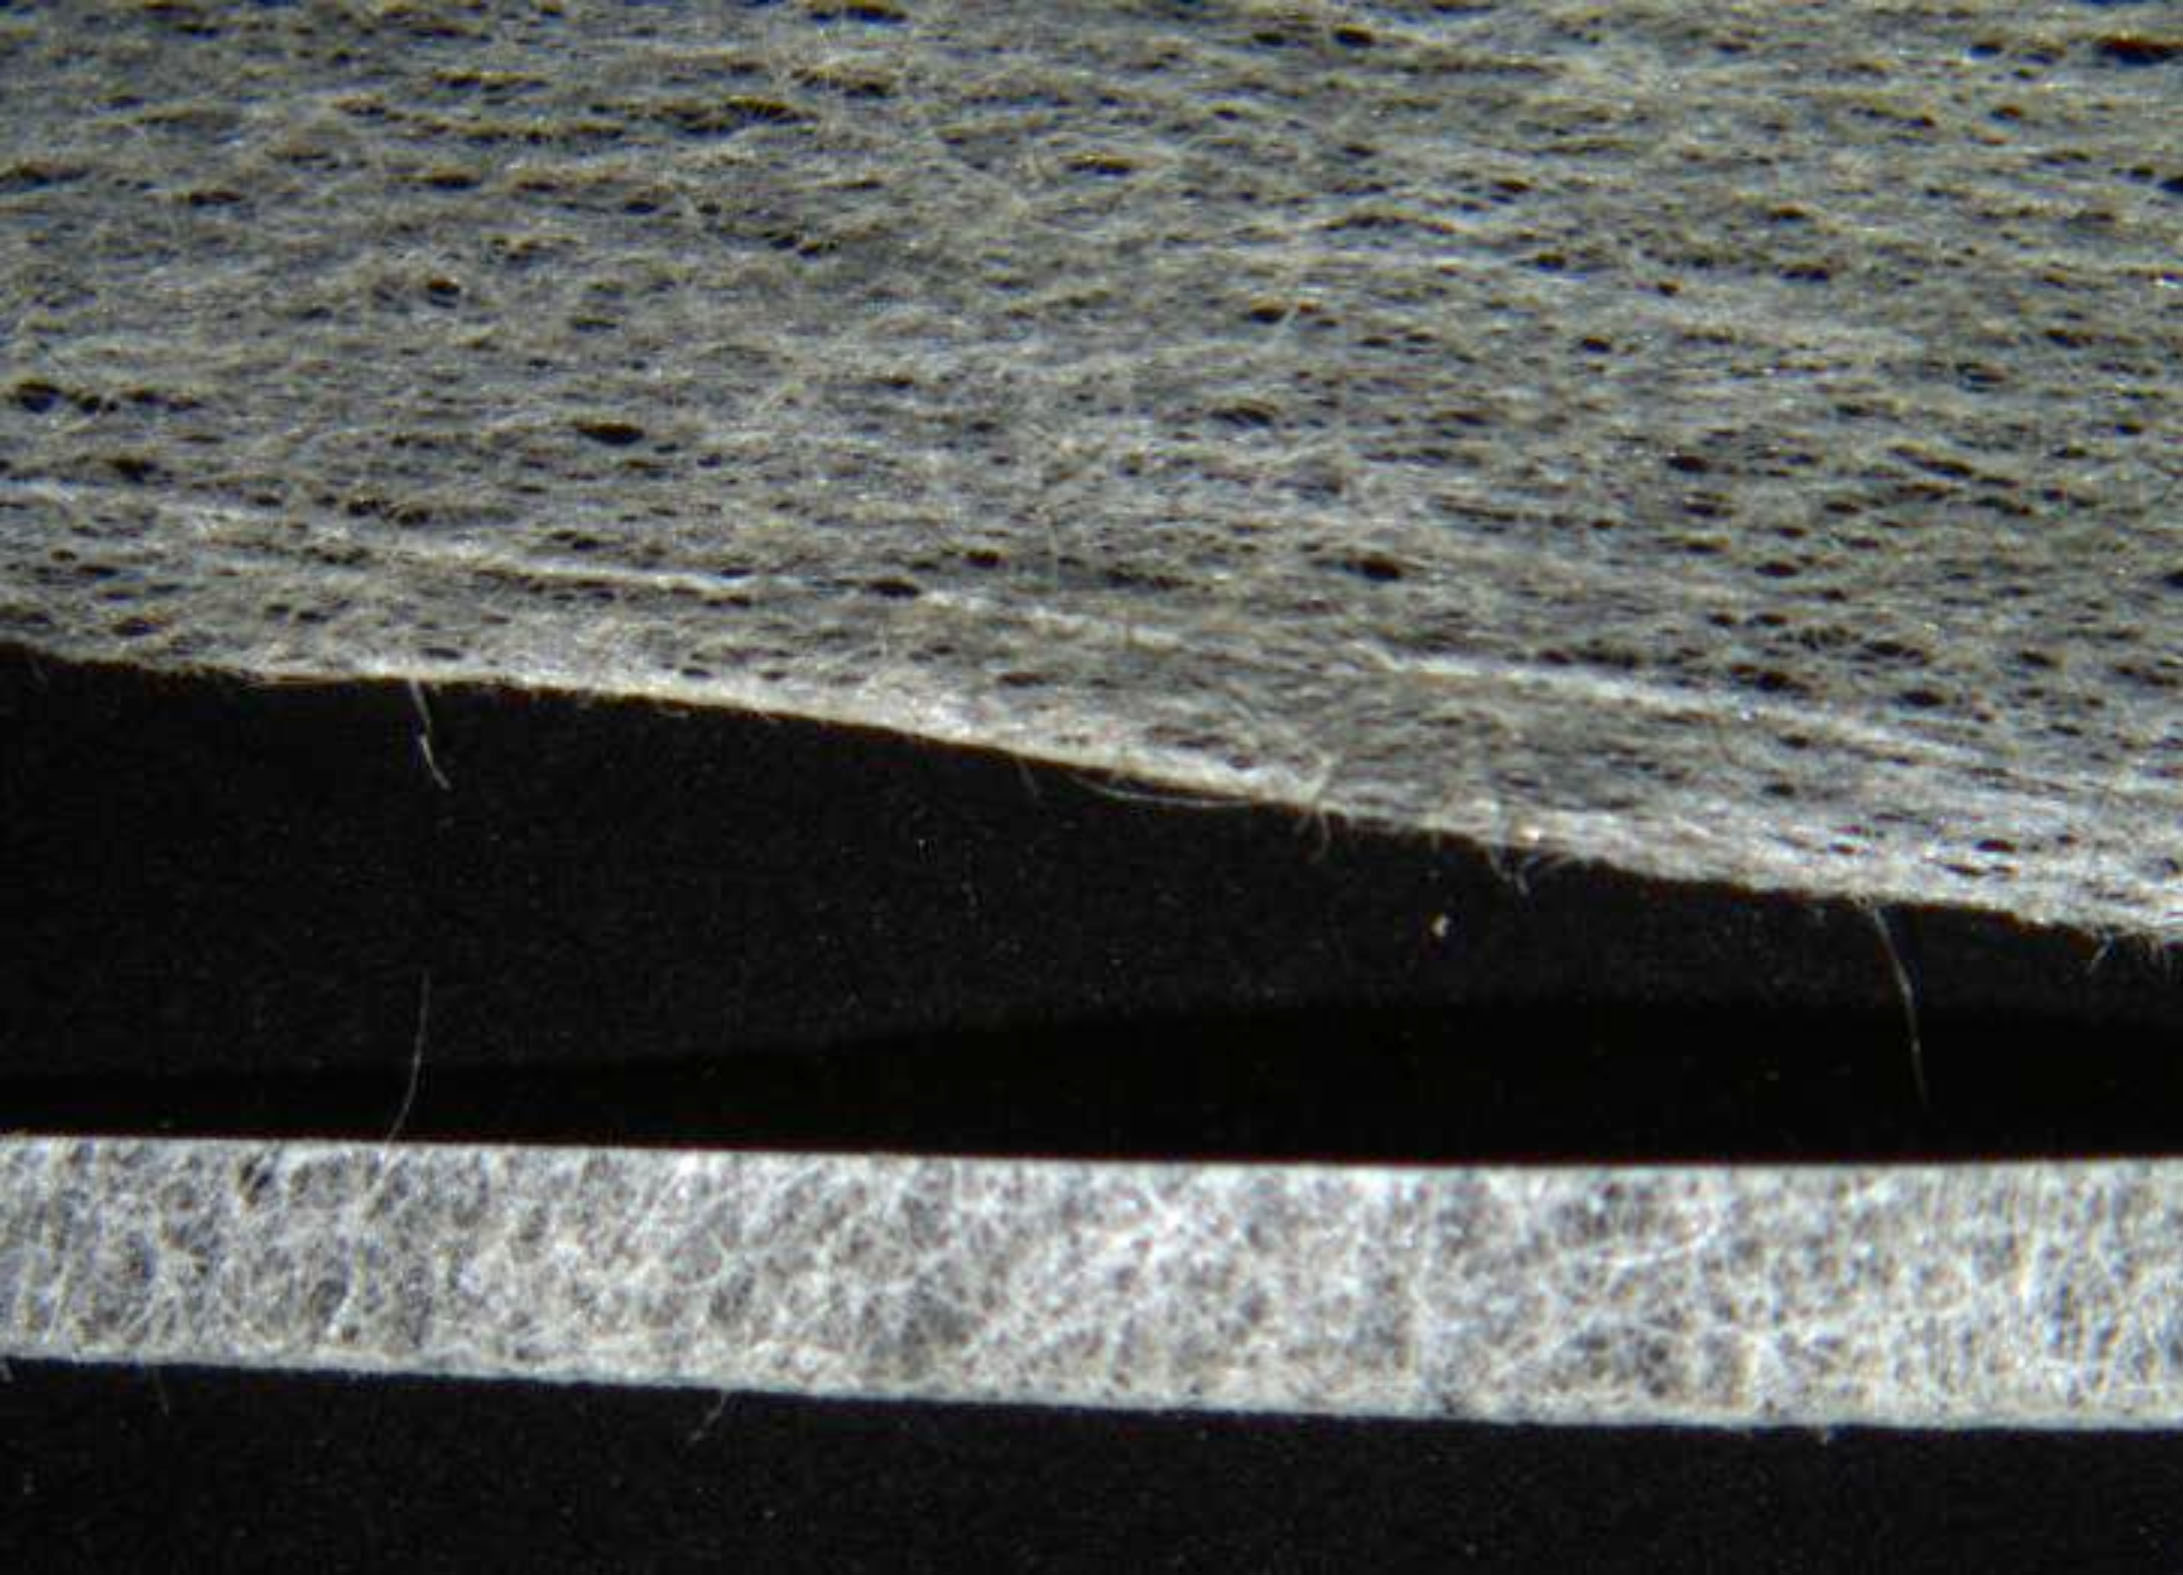 Comparative samples of an 1871 Field Diary page laminate (above) and another laminate (below) at 0.6x magnification. Copyright Livingstone Spectral Imaging Project team. Creative Commons Attribution-NonCommercial 3.0 Unported (https://creativecommons.org/licenses/by-nc/3.0/).